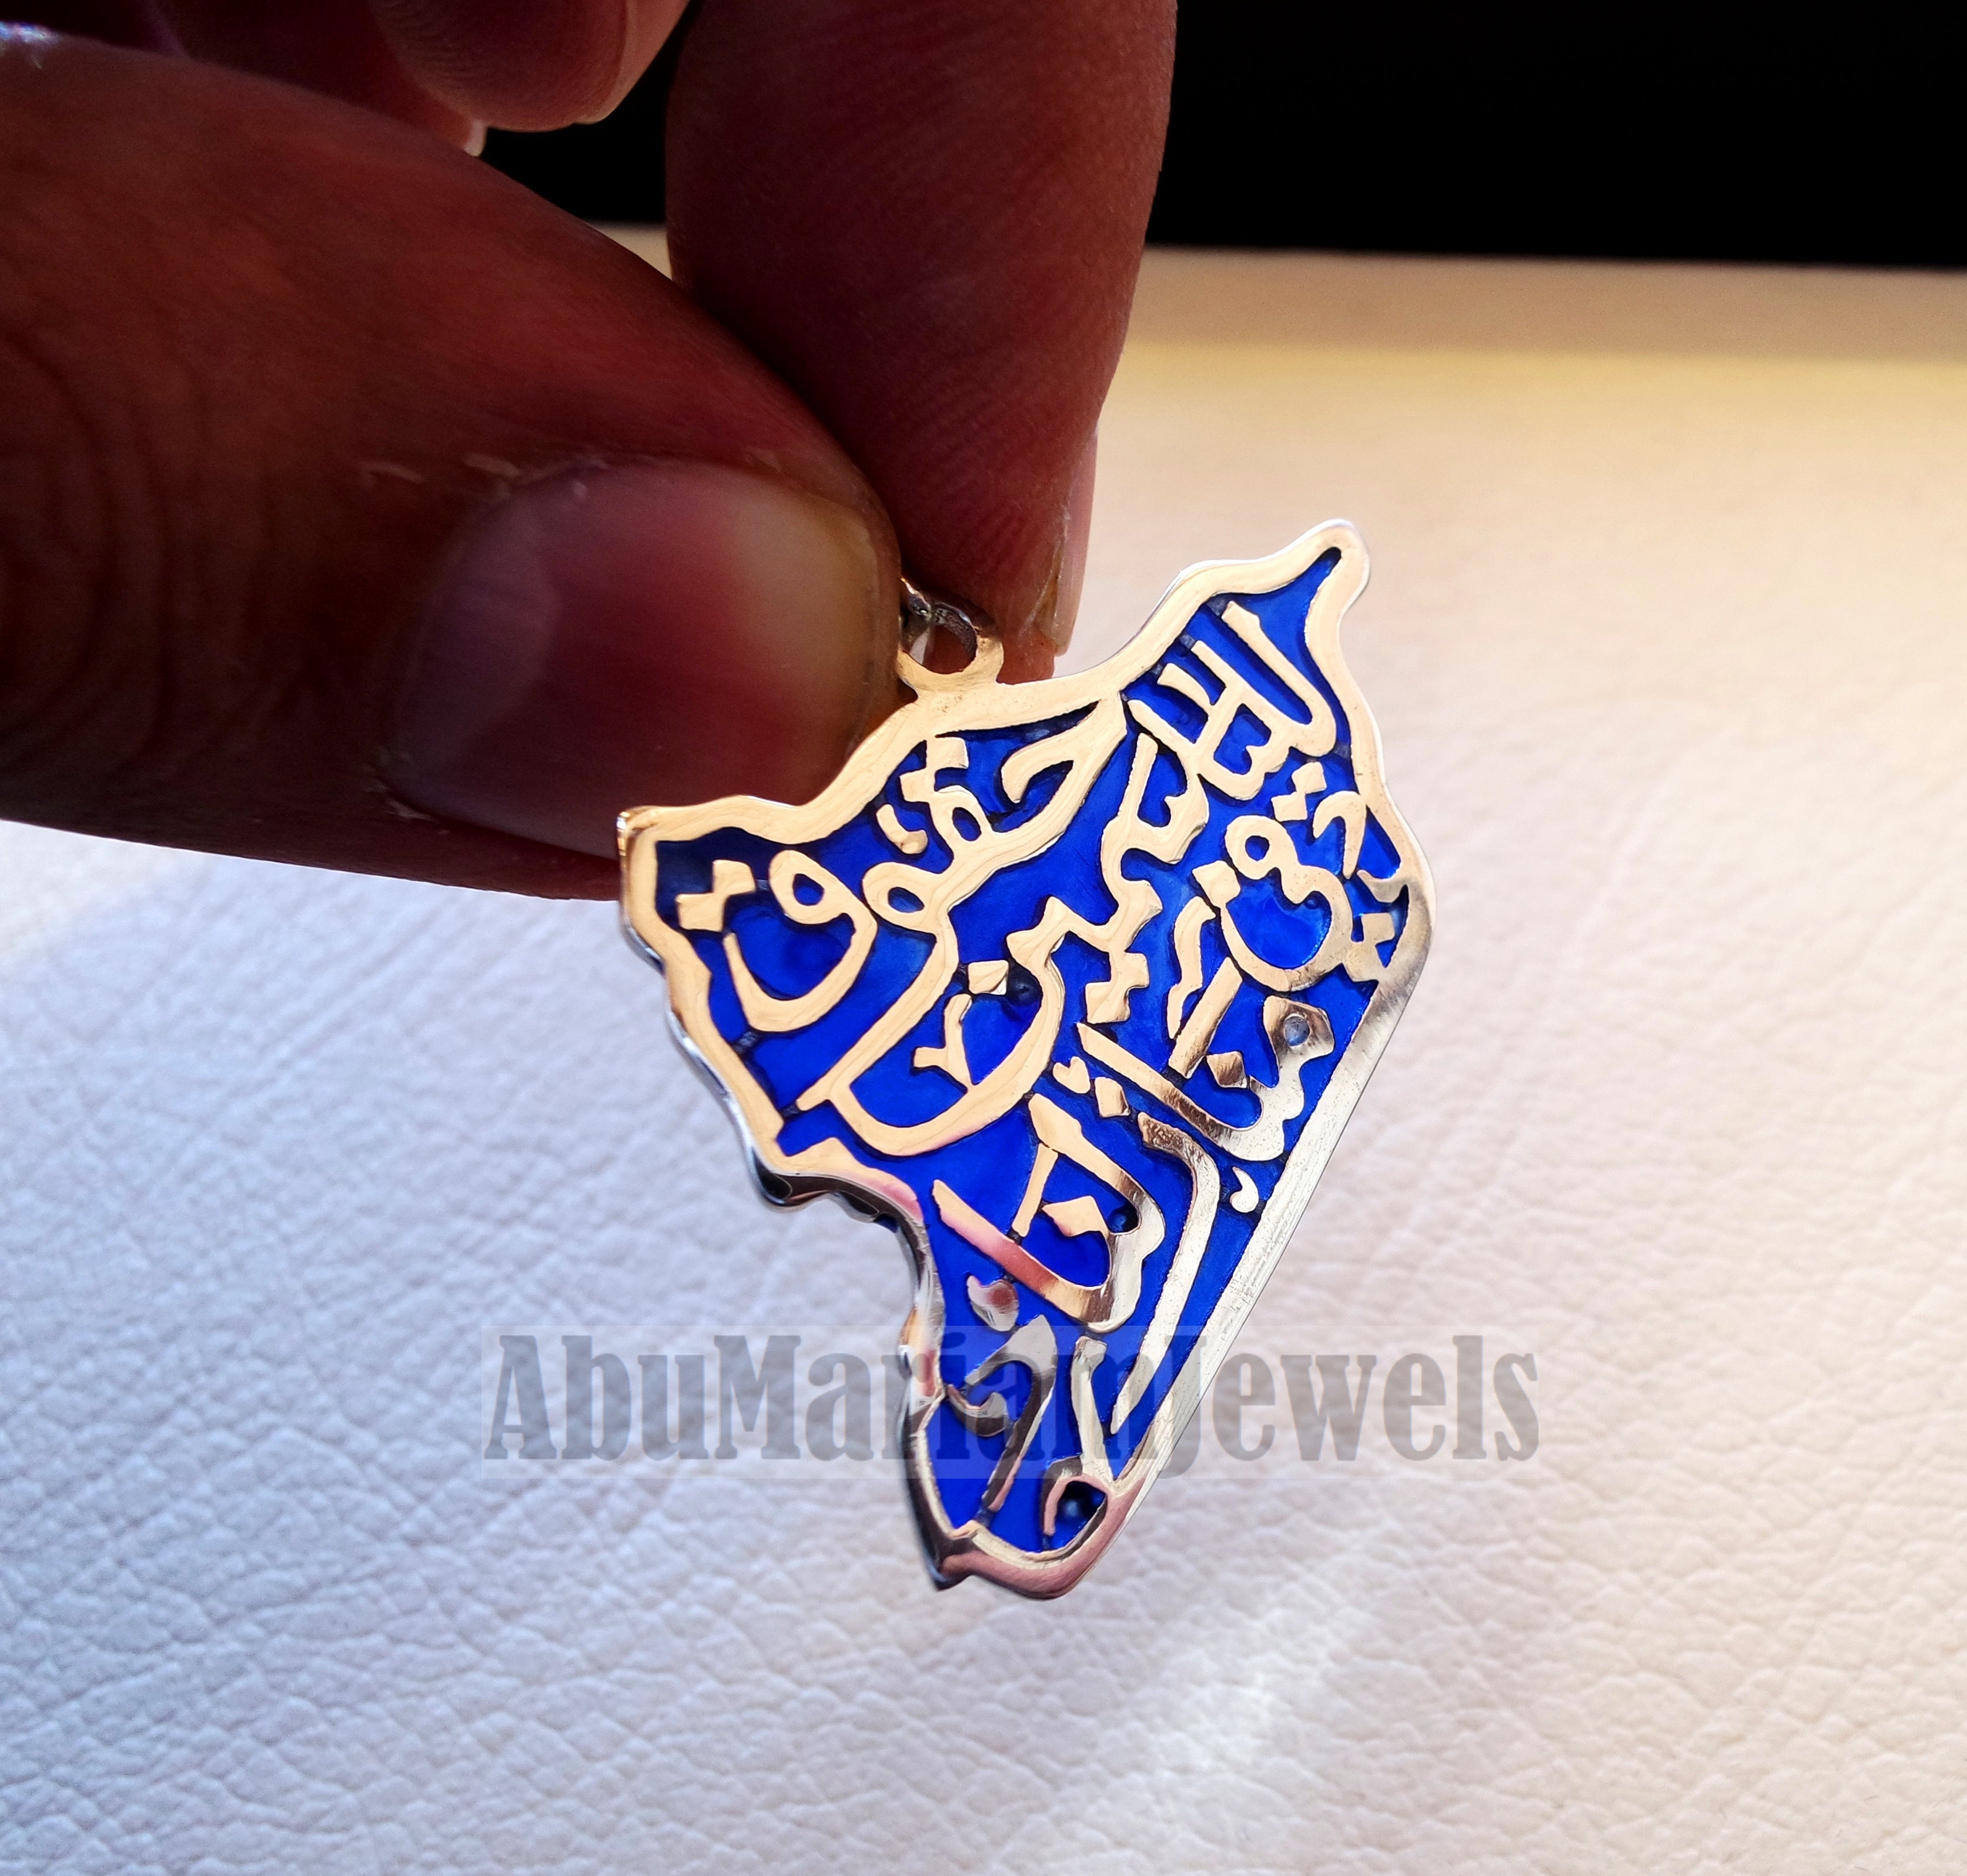 Syria map pendant with famous poem verse sterling silver 925 dark blue enamel مينا high quality jewelry arabic fast shipping خارطه سوريا